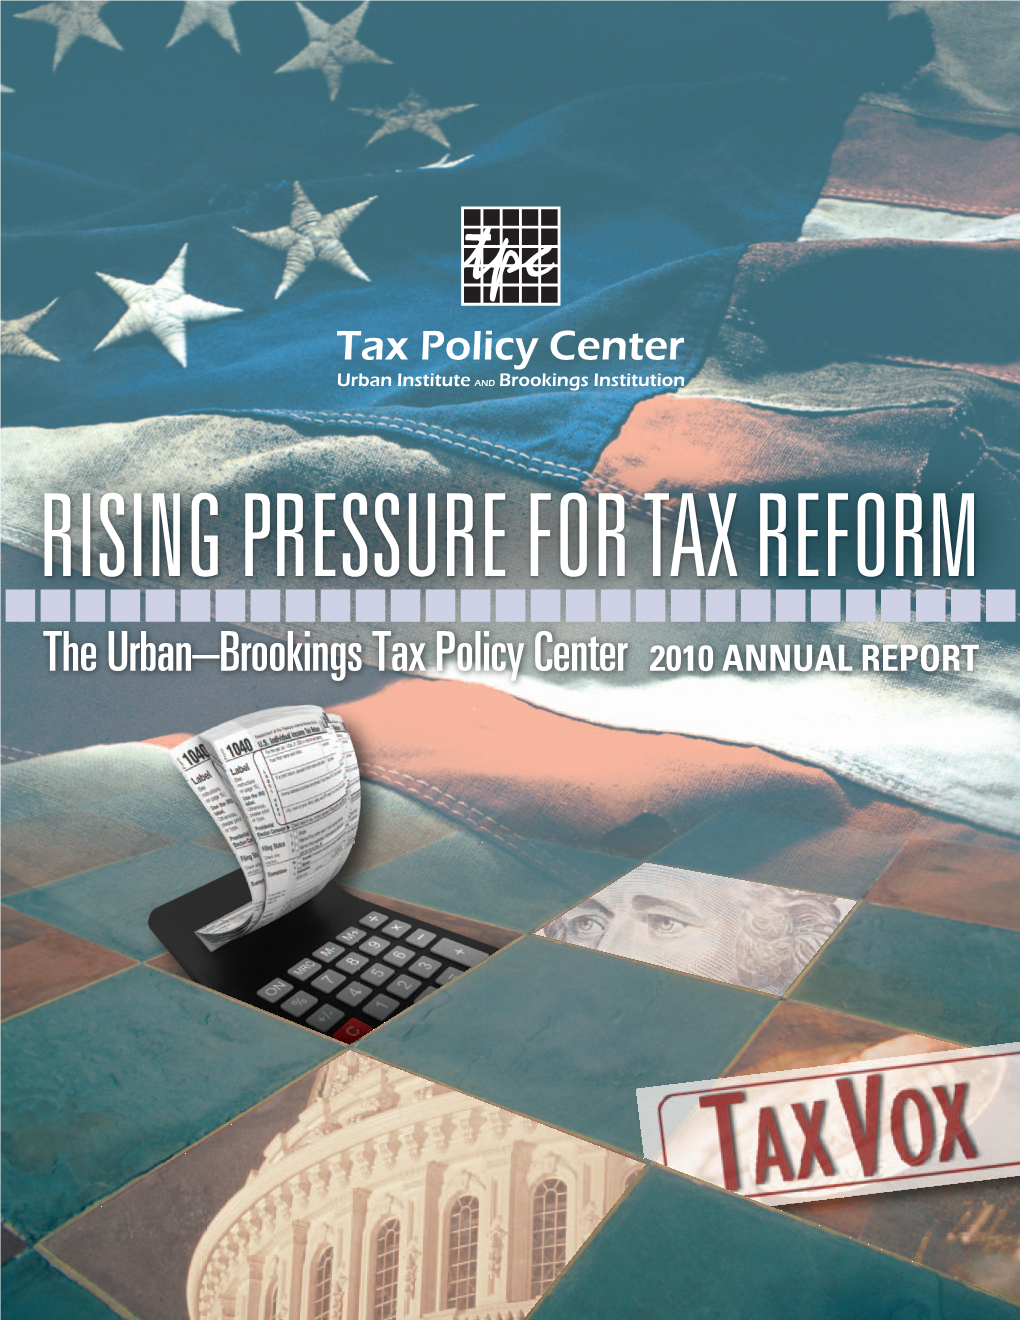 The Urban–Brookings Tax Policy Center 2010 ANNUAL REPORT RISING PRESSURE for TAX REFORM